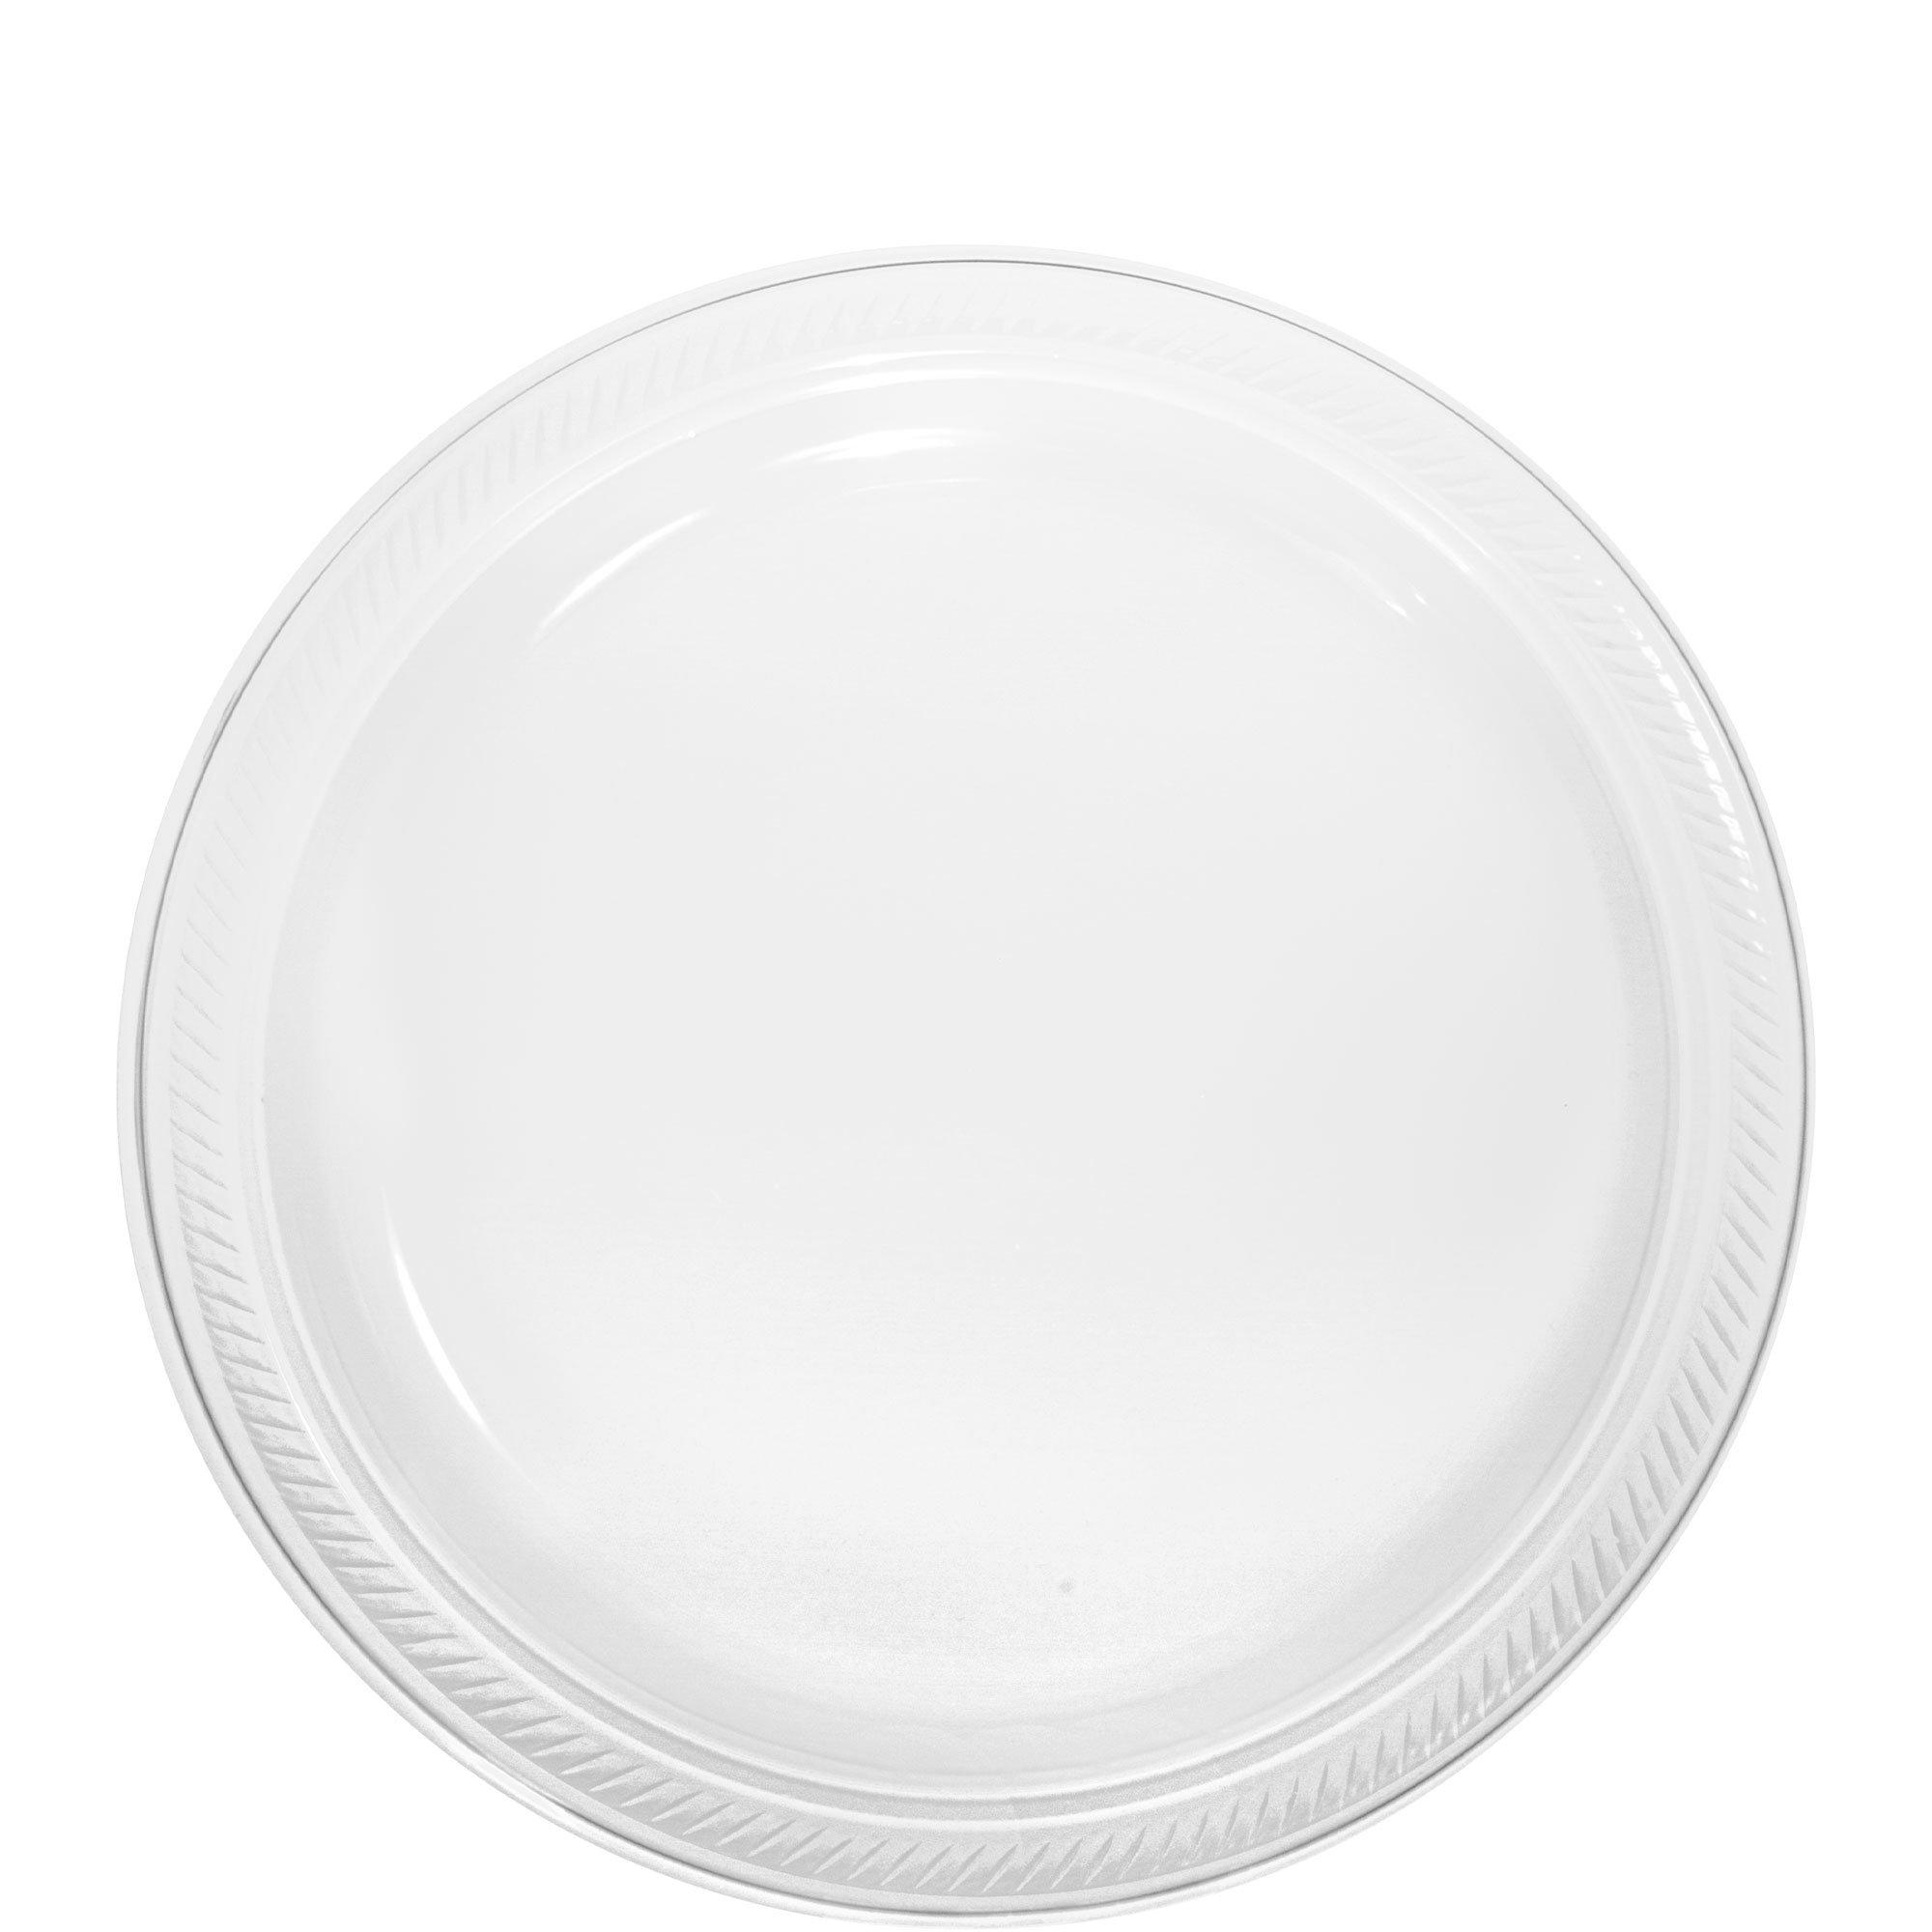 Big Party Pack Clear Plastic Dessert Plates 50ct | Party City